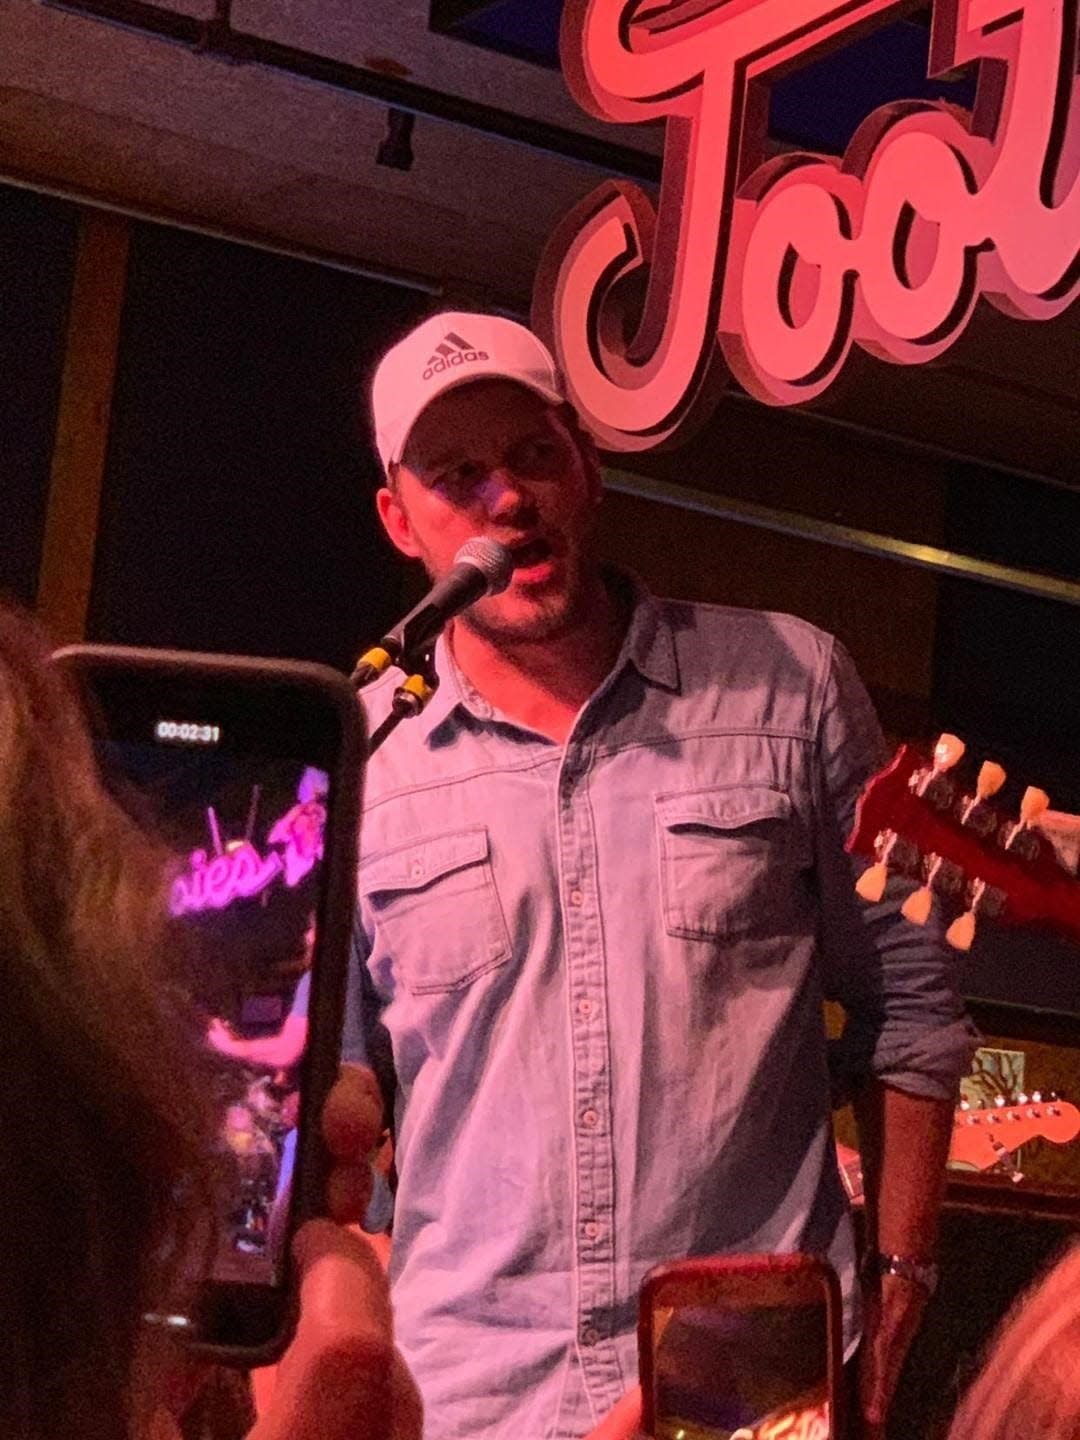 Chris Pratt showed up at Tootsie's Orchid Lounge and sang Garth Brooks' 